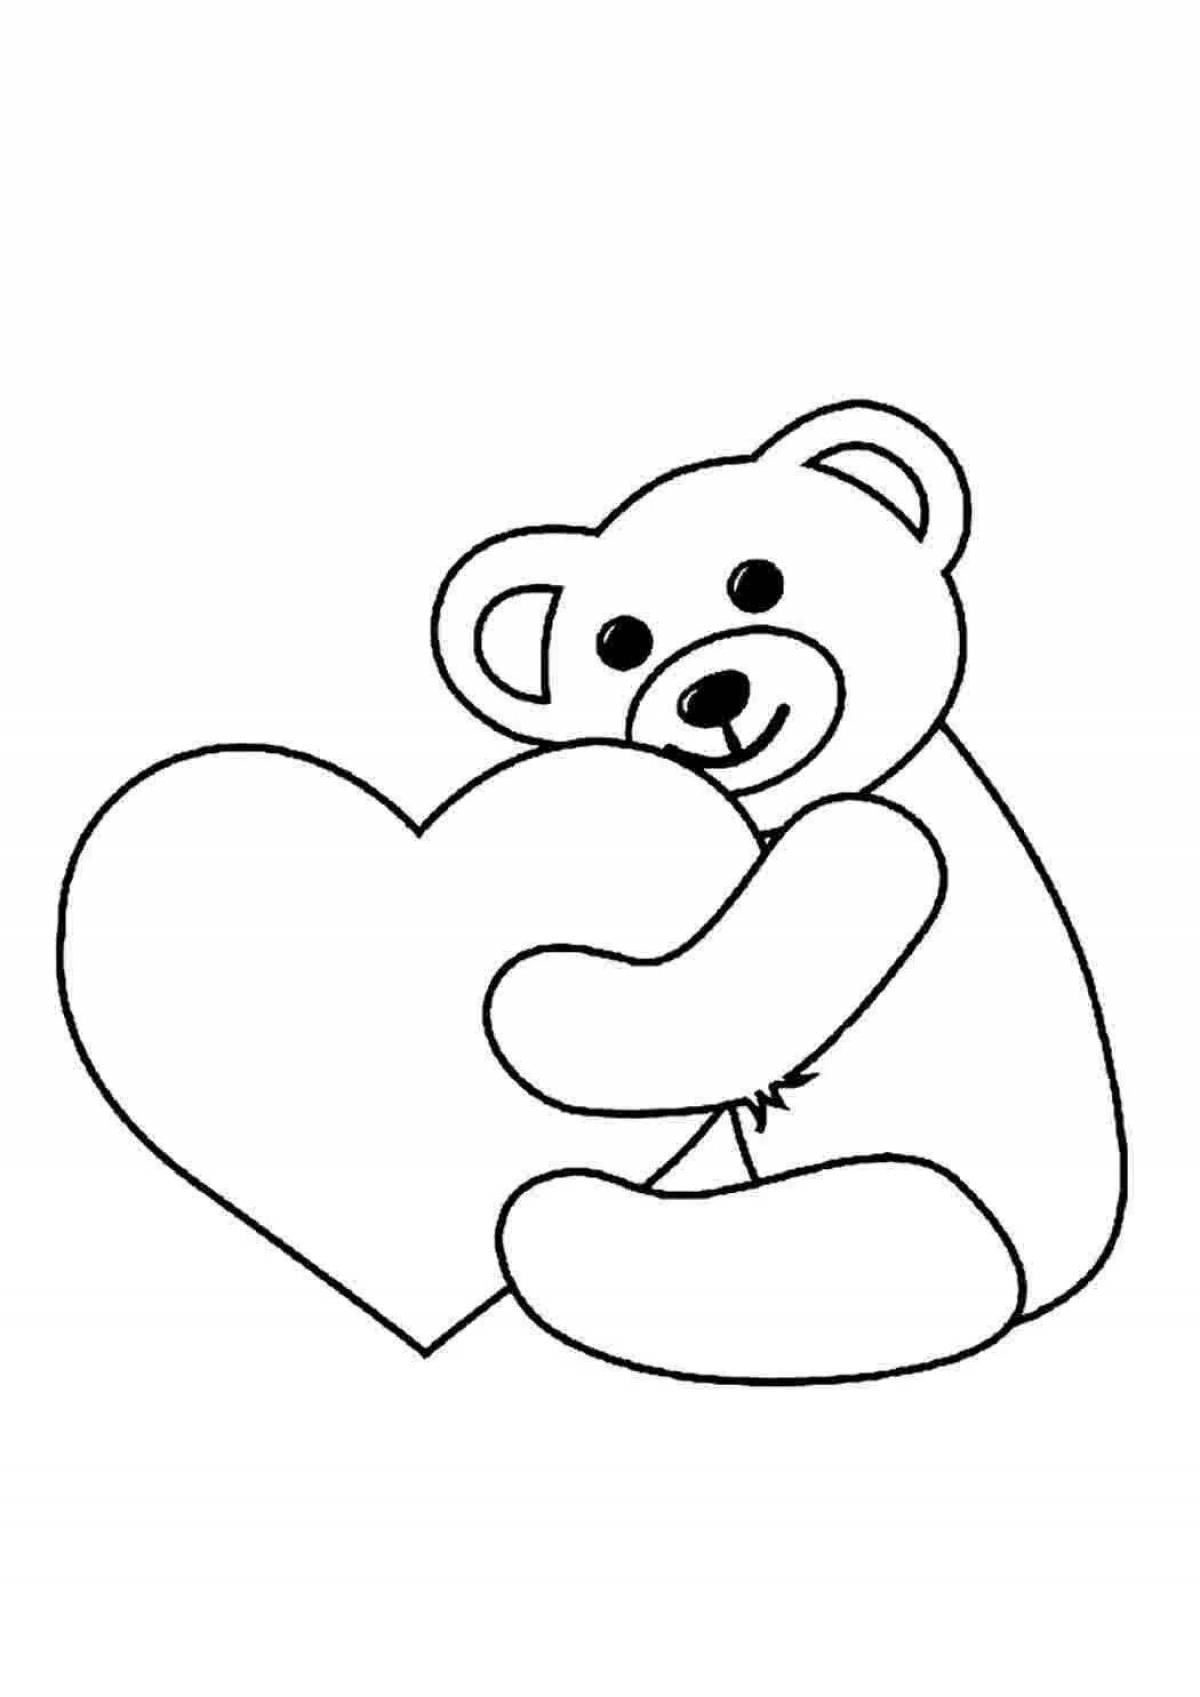 Coloring happy teddy bear with a heart